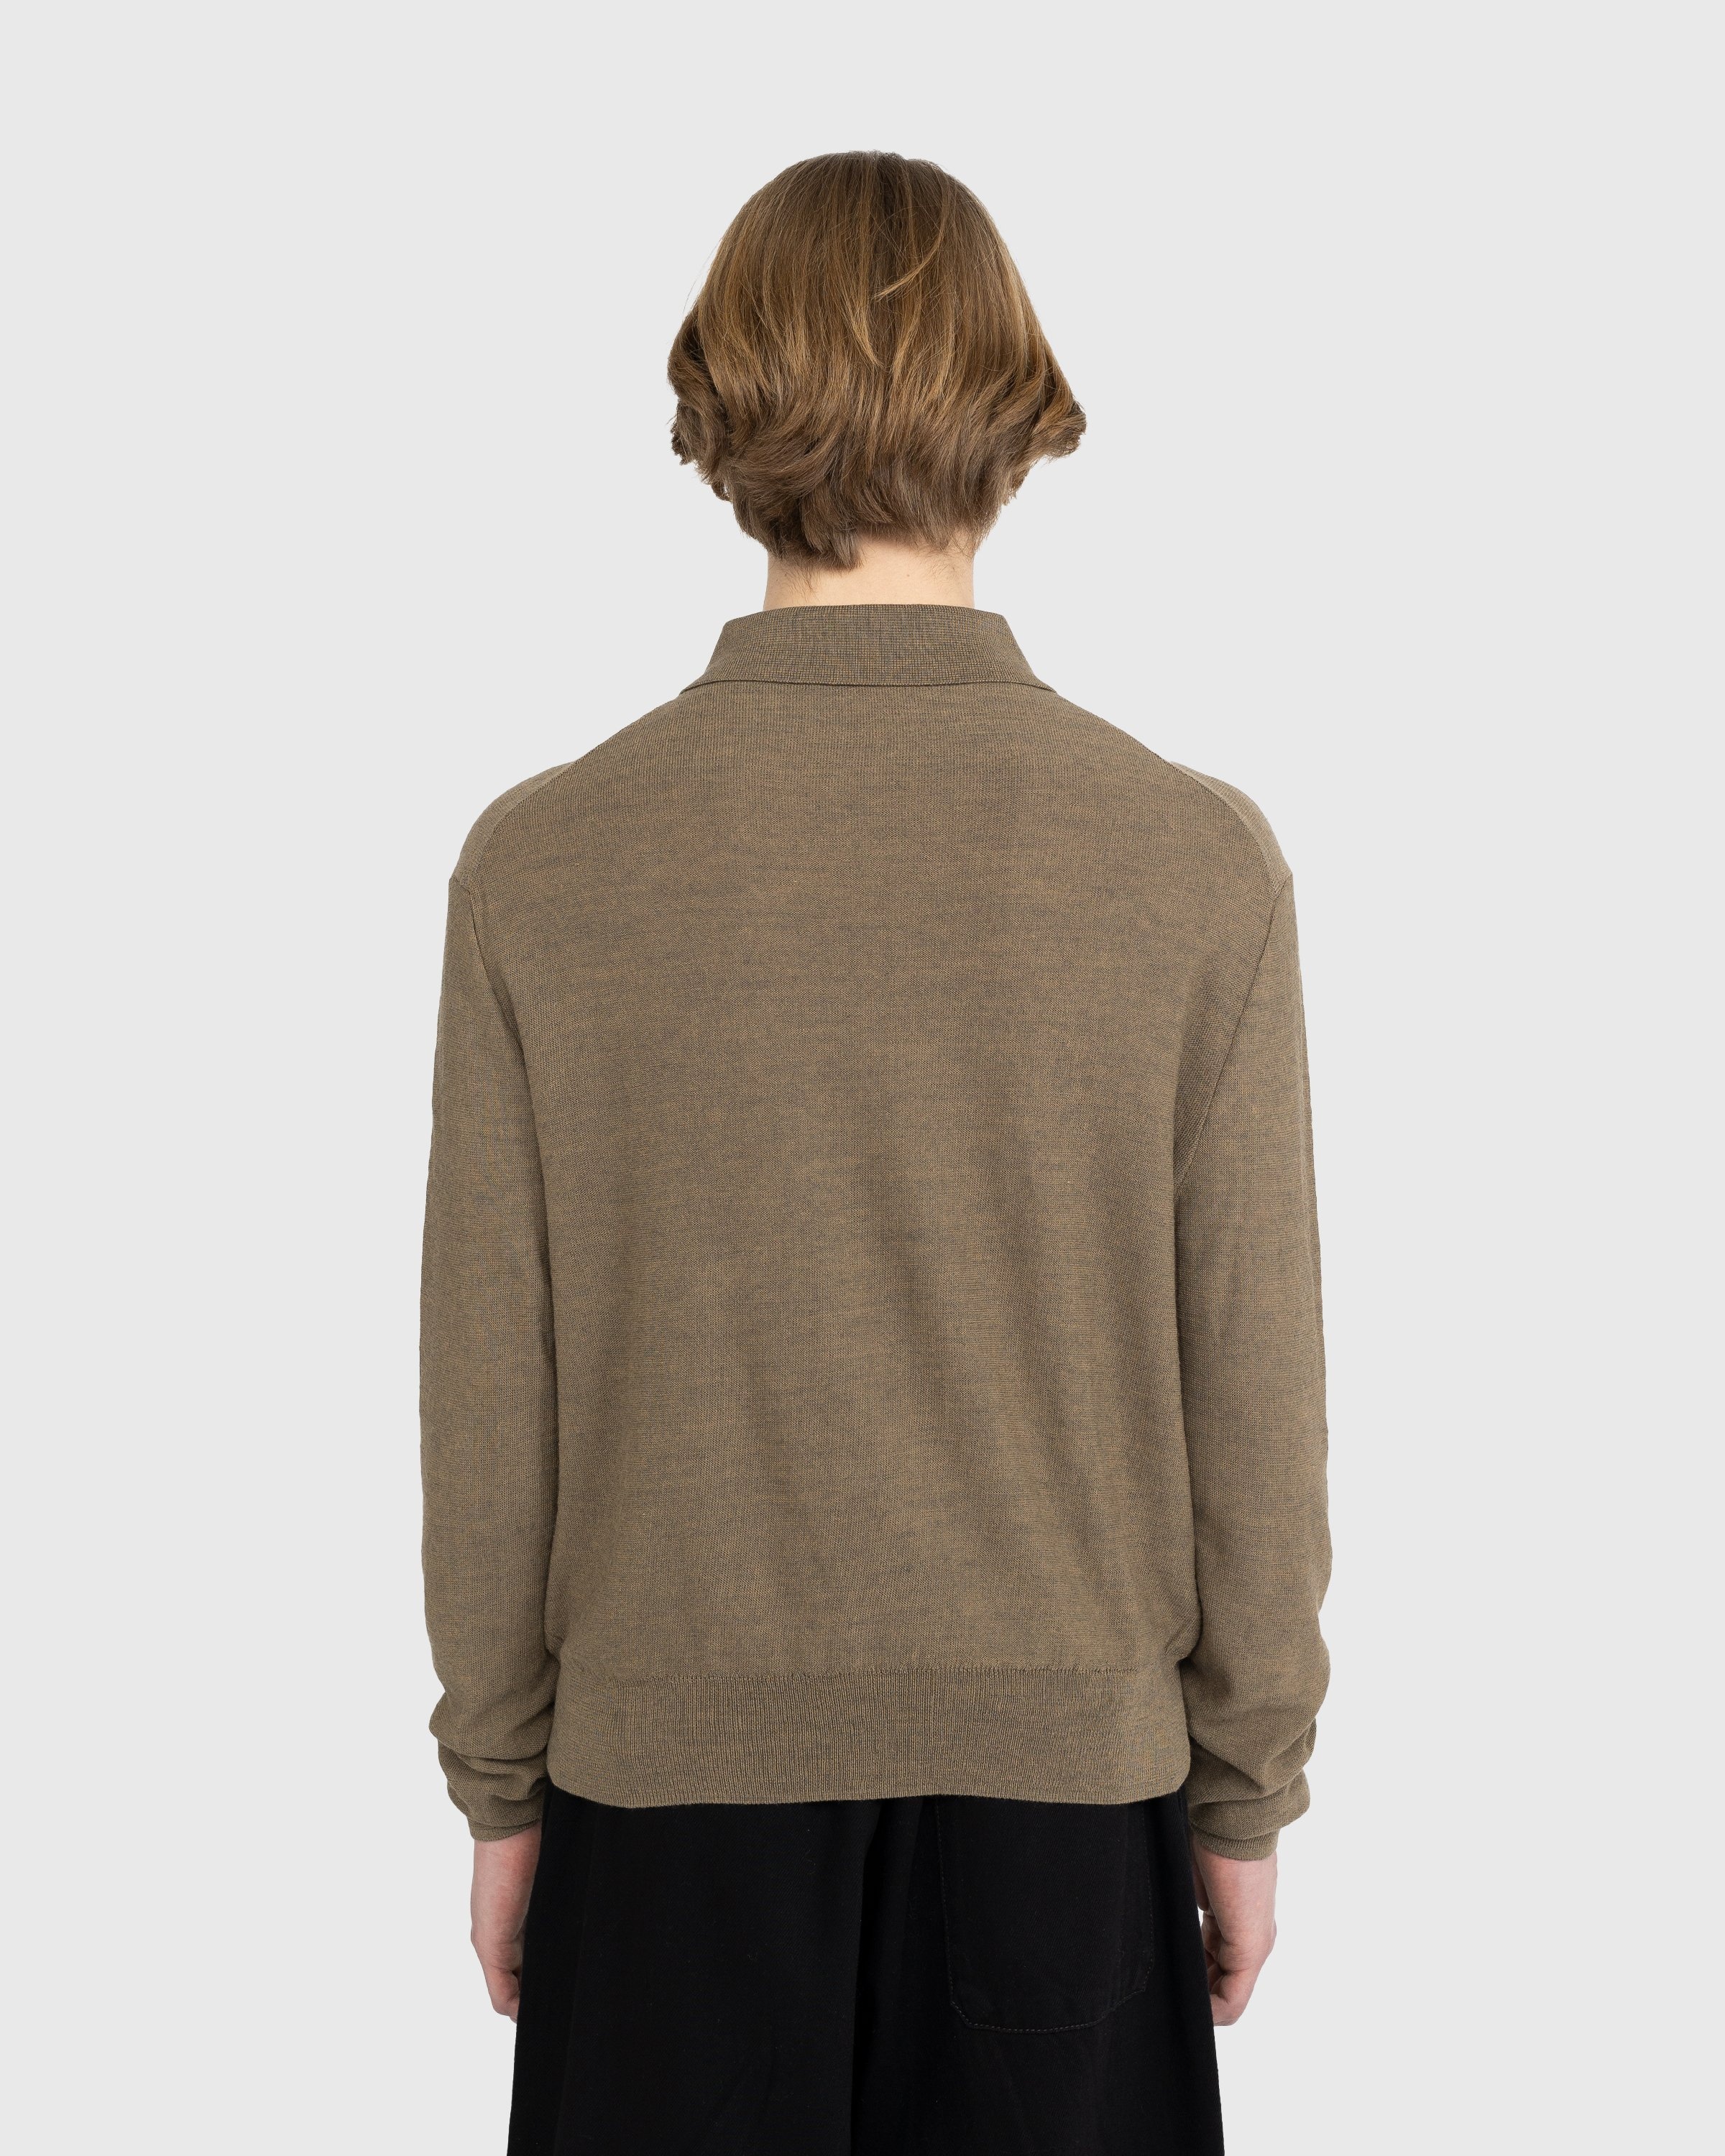 Lemaire – Convertible Collar Knit Shirt - Polos - Brown - Image 3